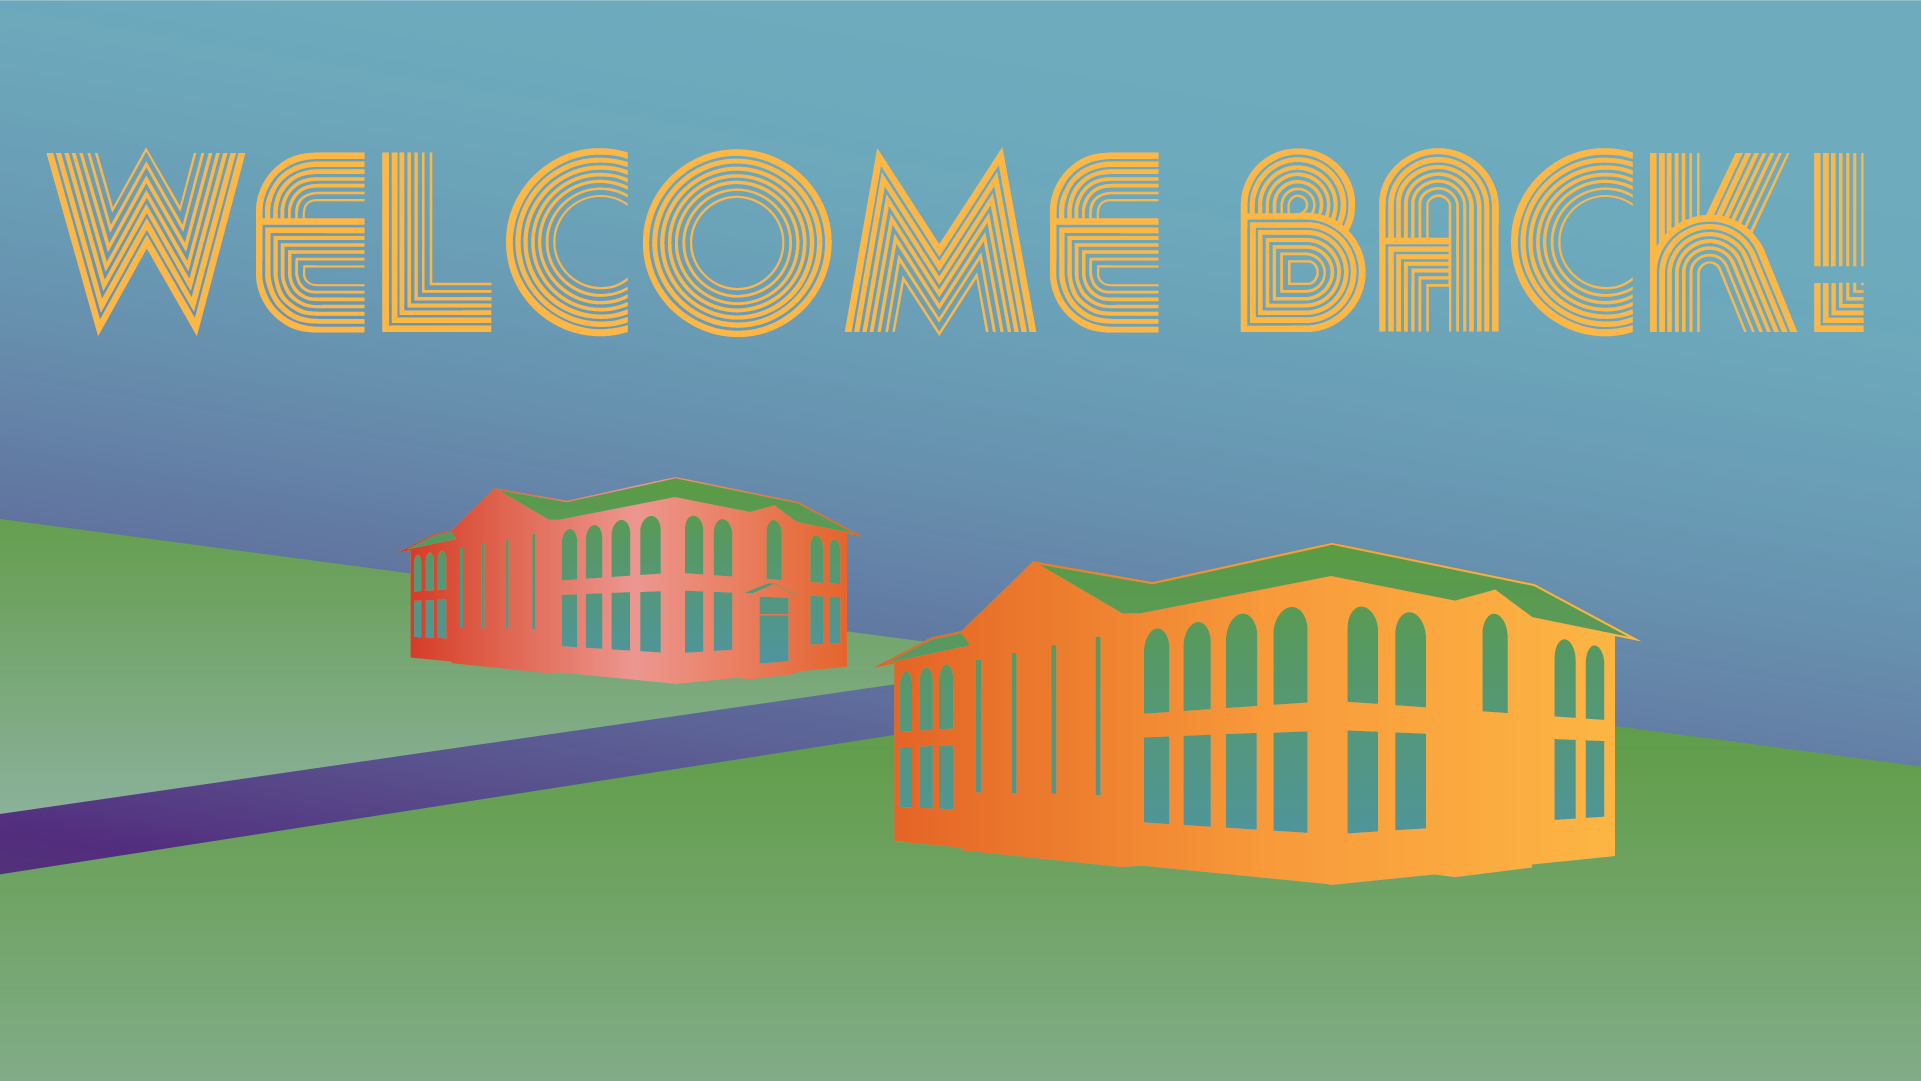 Welcome back graphic w/ East and West Duke buildings